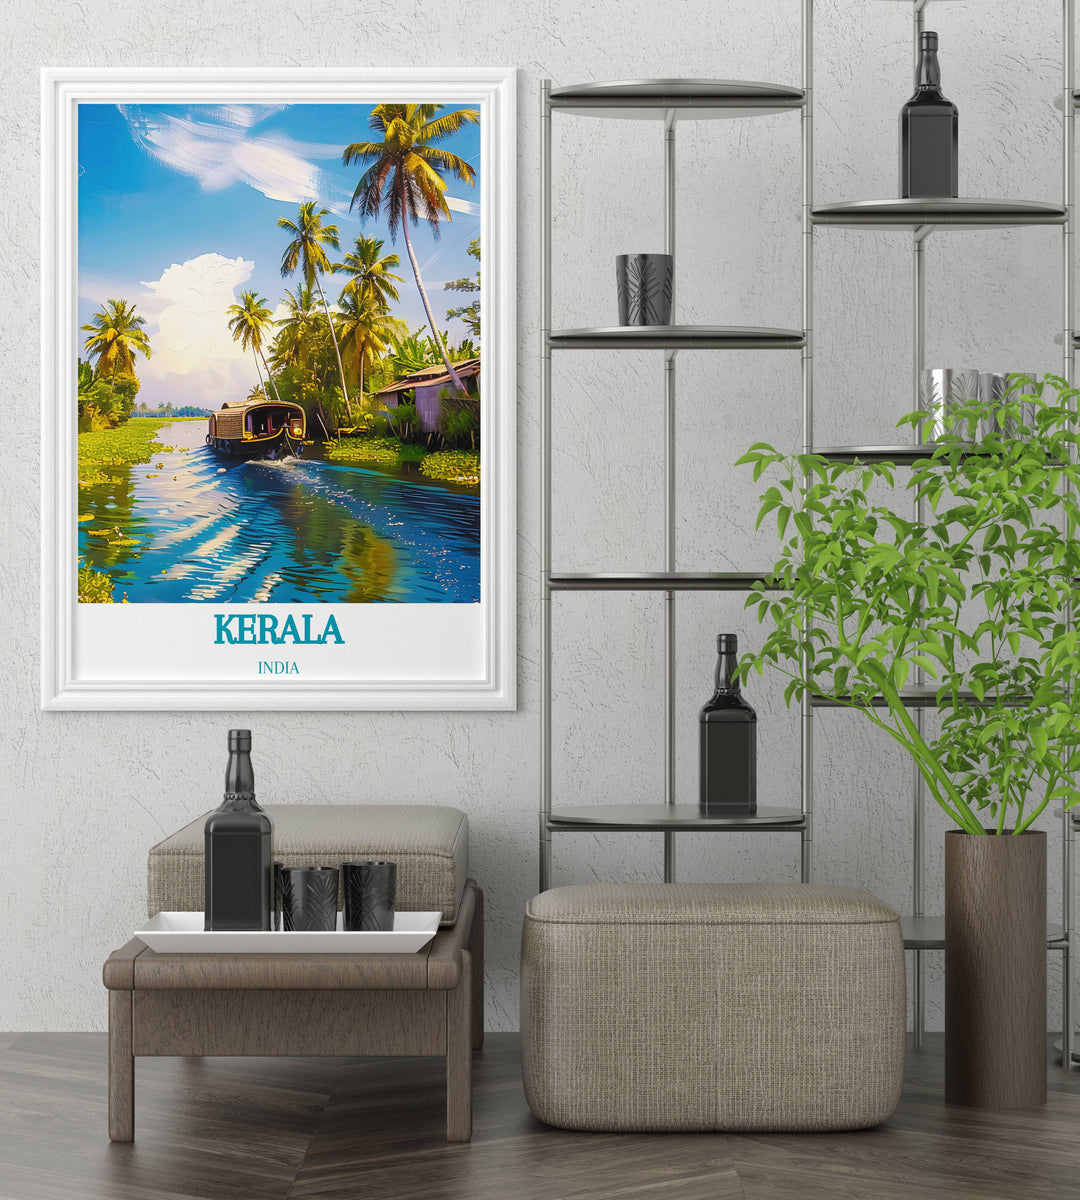 Customizable Kerala India art print focusing on personal favorite landmarks or scenes ideal for gifting or personal collections